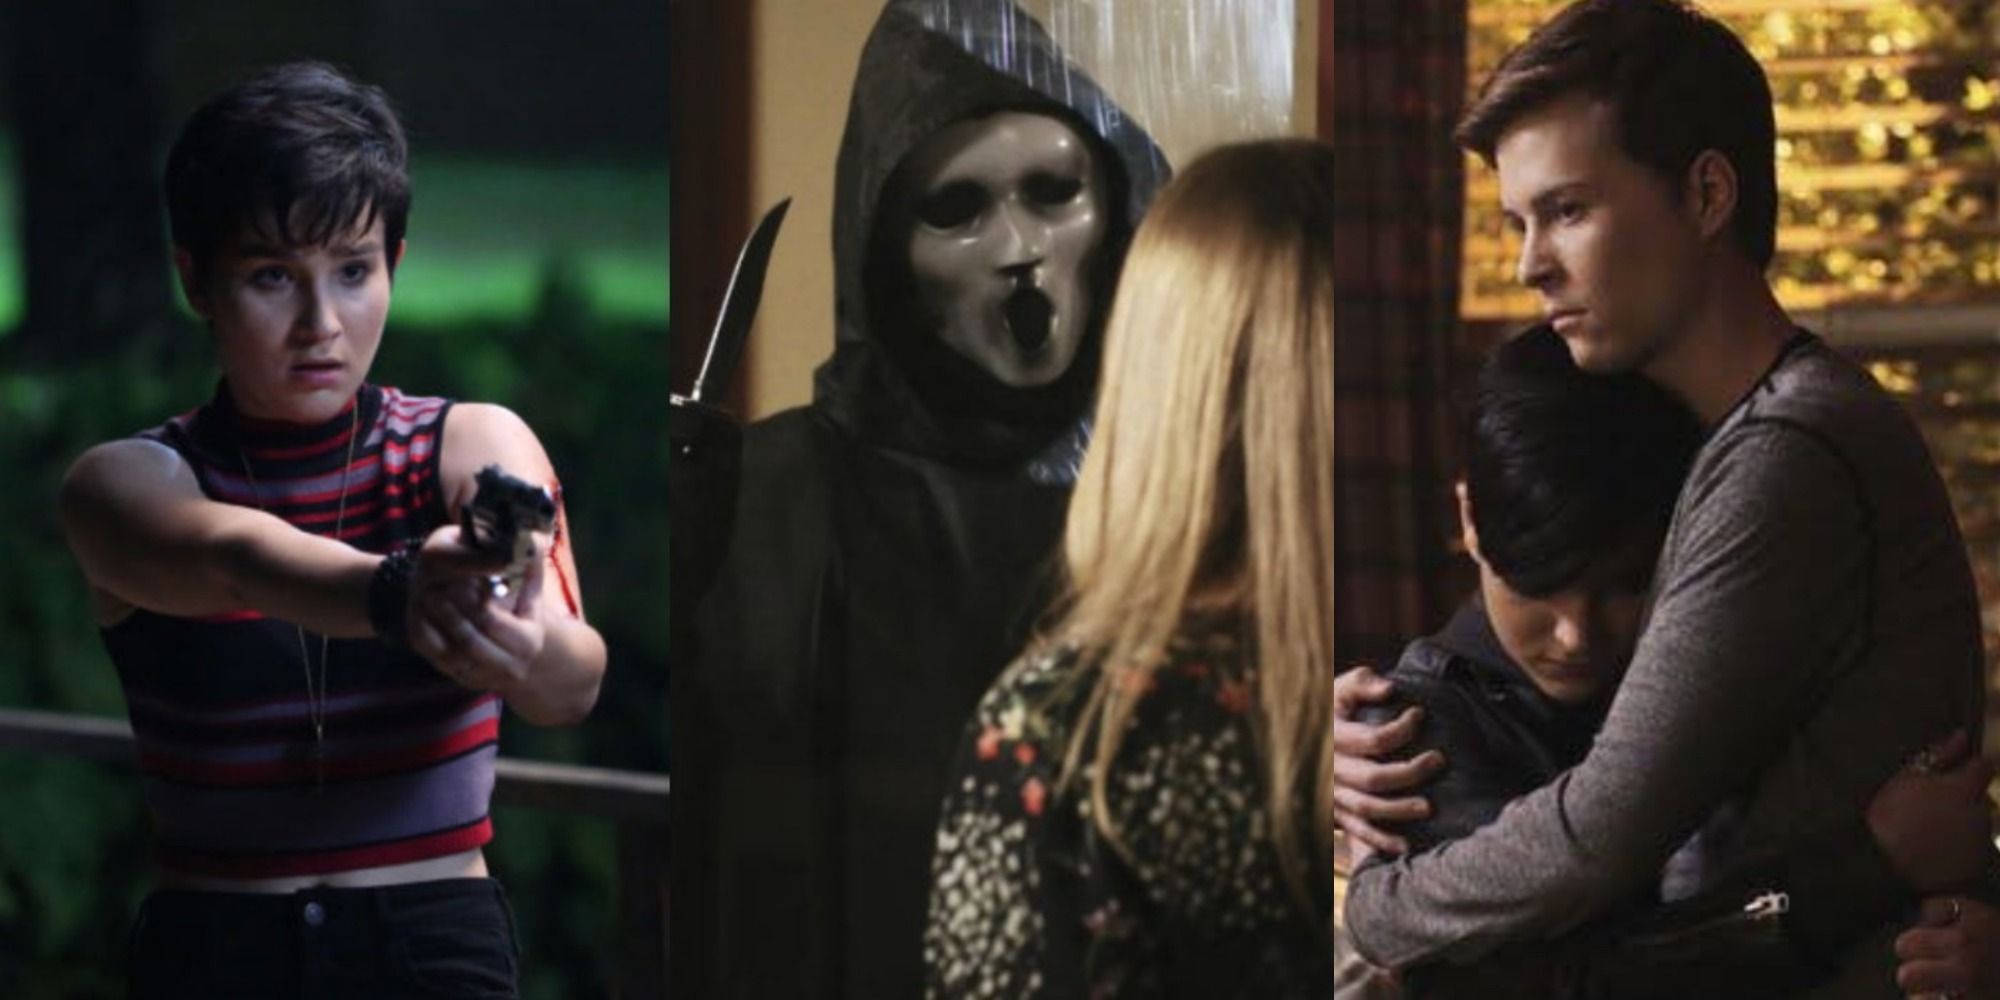 A split image depicts Audrey, the Killer, and two people hugging in Scream